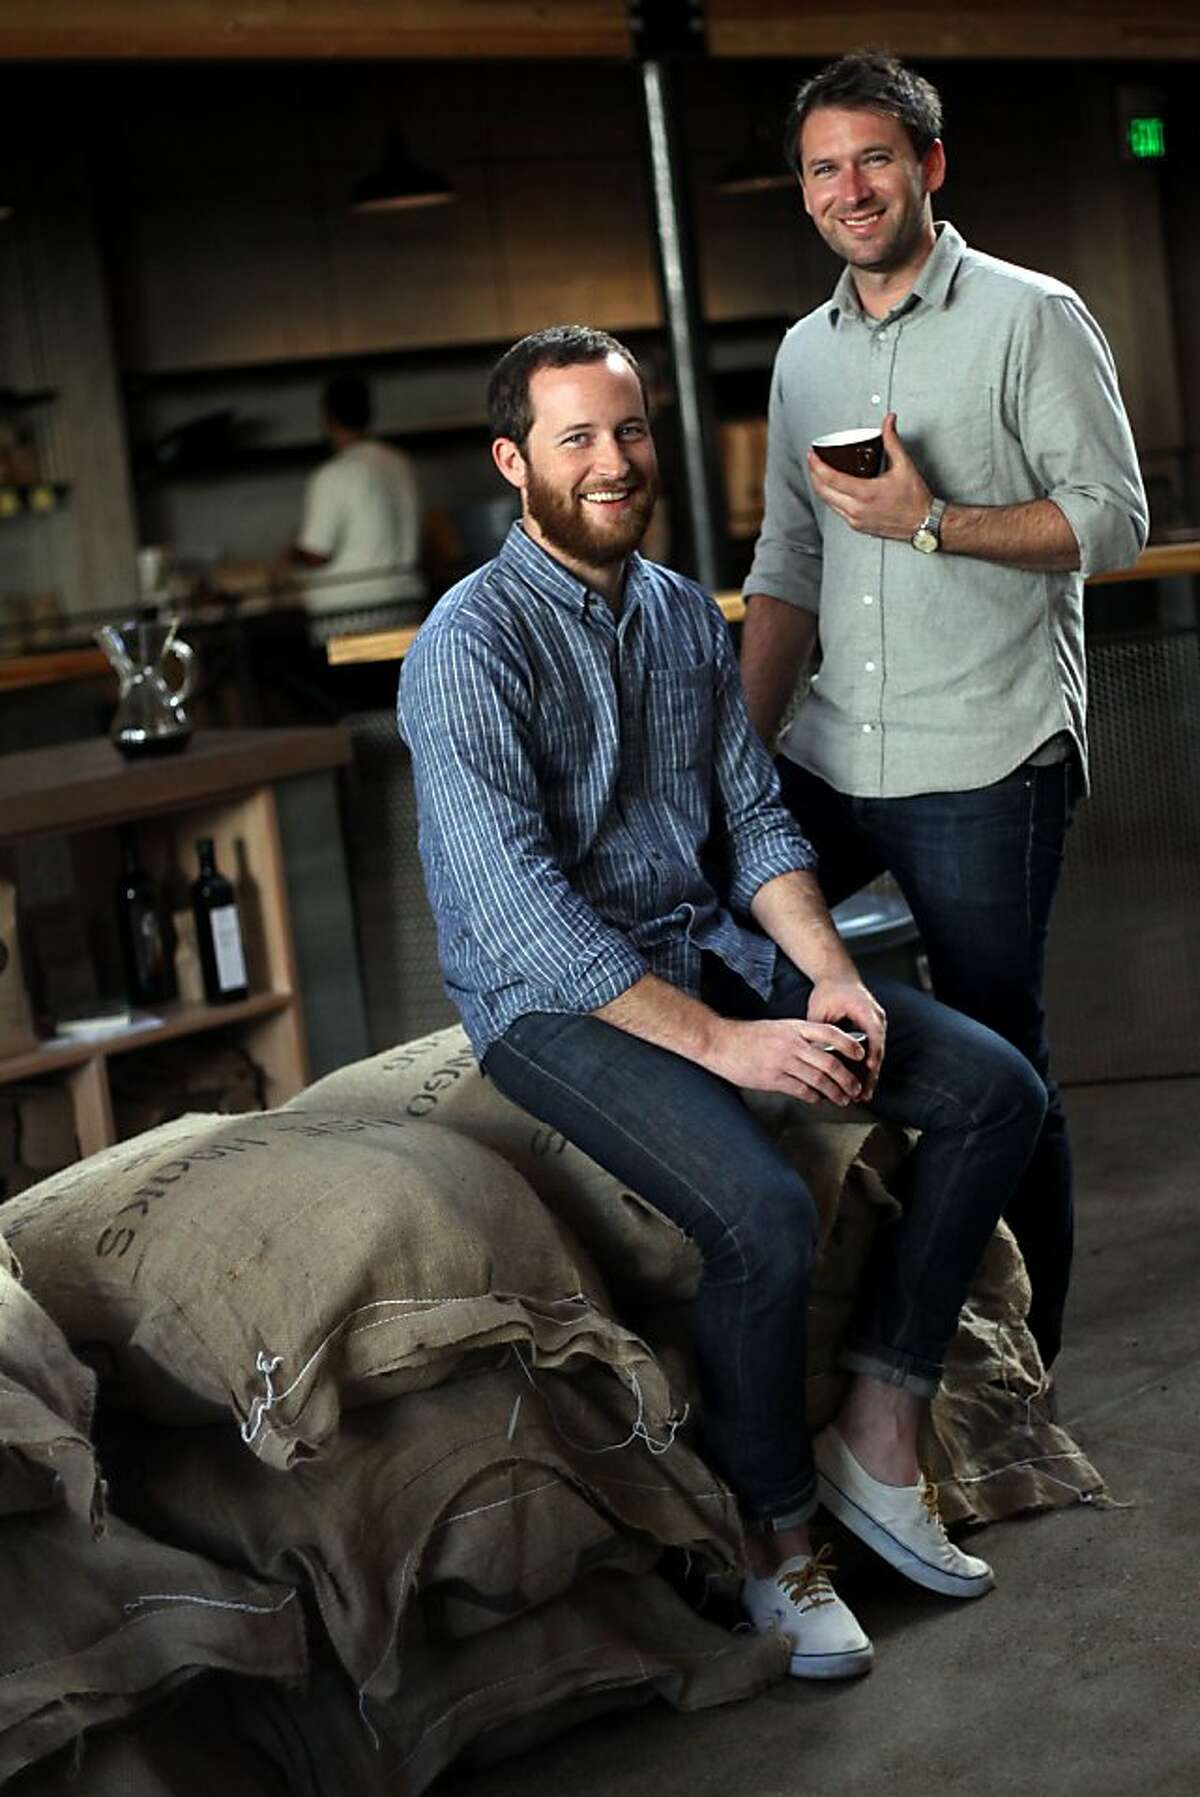 Brothers and Sightglass co-owners, Justin and Jerad Morrison, inside the Coffee Bar and Roastery on Seventh Street in San Francisco, CA on November 1, 2011.